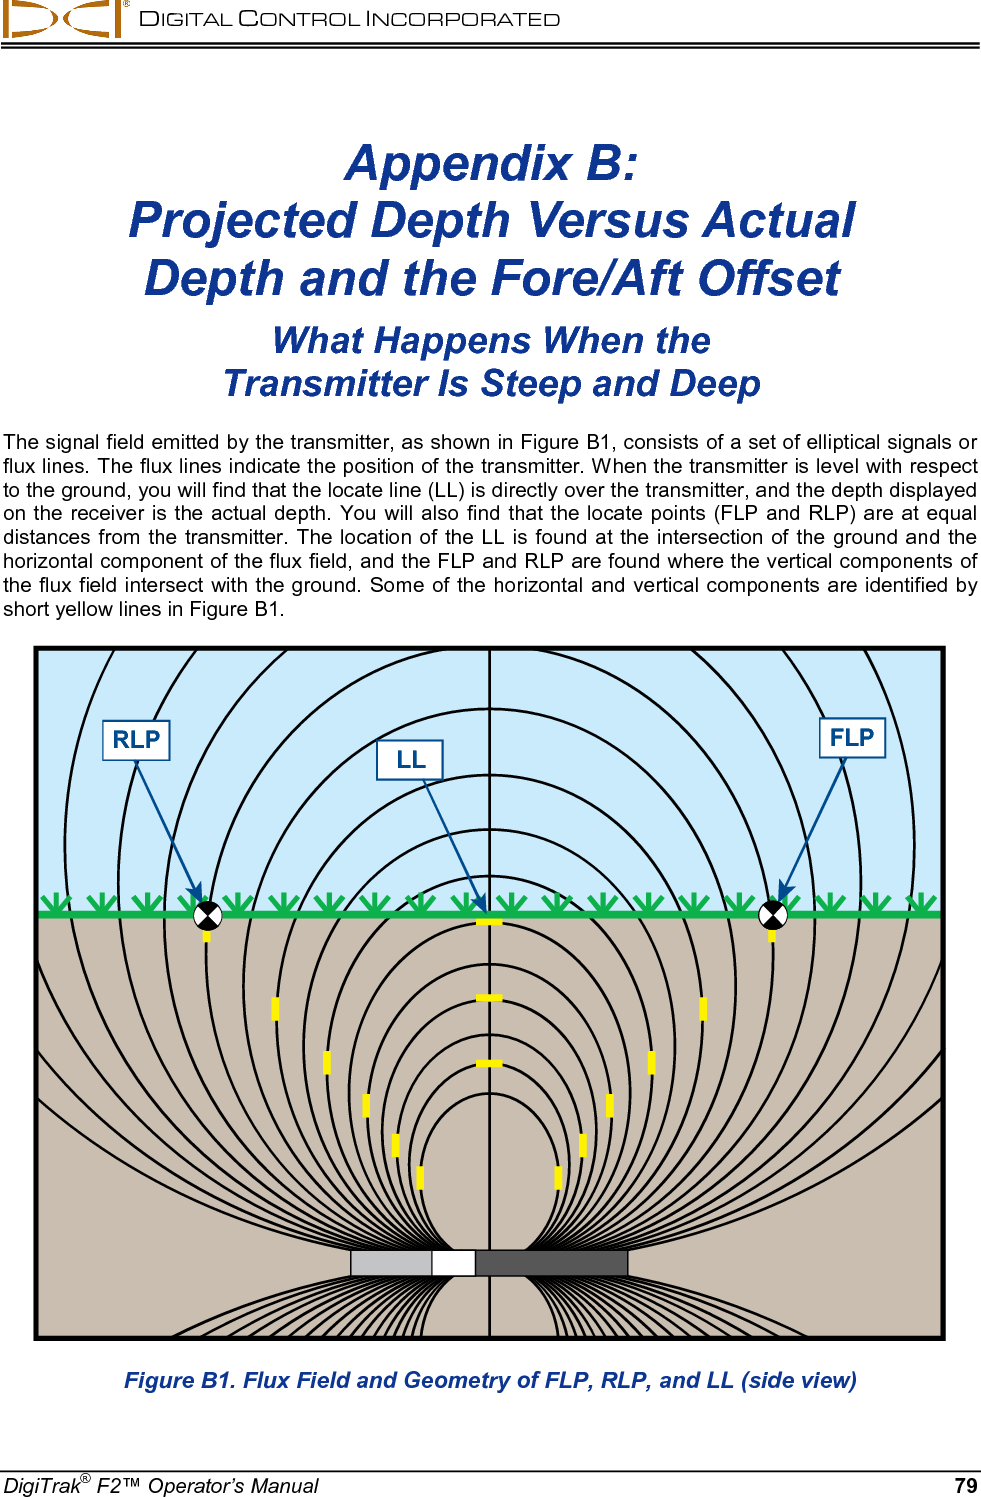  DIGITAL CONTROL INCORPORATED  DigiTrak® F2™ Operator’s Manual 79 Appendix B:  Projected Depth Versus Actual  Depth and the Fore/Aft Offset  What Happens When the  Transmitter Is Steep and Deep The signal field emitted by the transmitter, as shown in Figure B1, consists of a set of elliptical signals or flux lines. The flux lines indicate the position of the transmitter. When the transmitter is level with respect to the ground, you will find that the locate line (LL) is directly over the transmitter, and the depth displayed on the receiver is the actual depth. You will also find that the locate points (FLP and RLP) are at equal distances from the transmitter. The location of the LL is found at the intersection of the ground and the horizontal component of the flux field, and the FLP and RLP are found where the vertical components of the flux field intersect with the ground. Some of the horizontal and vertical components are identified by short yellow lines in Figure B1. RLP FLPLL Figure B1. Flux Field and Geometry of FLP, RLP, and LL (side view) 